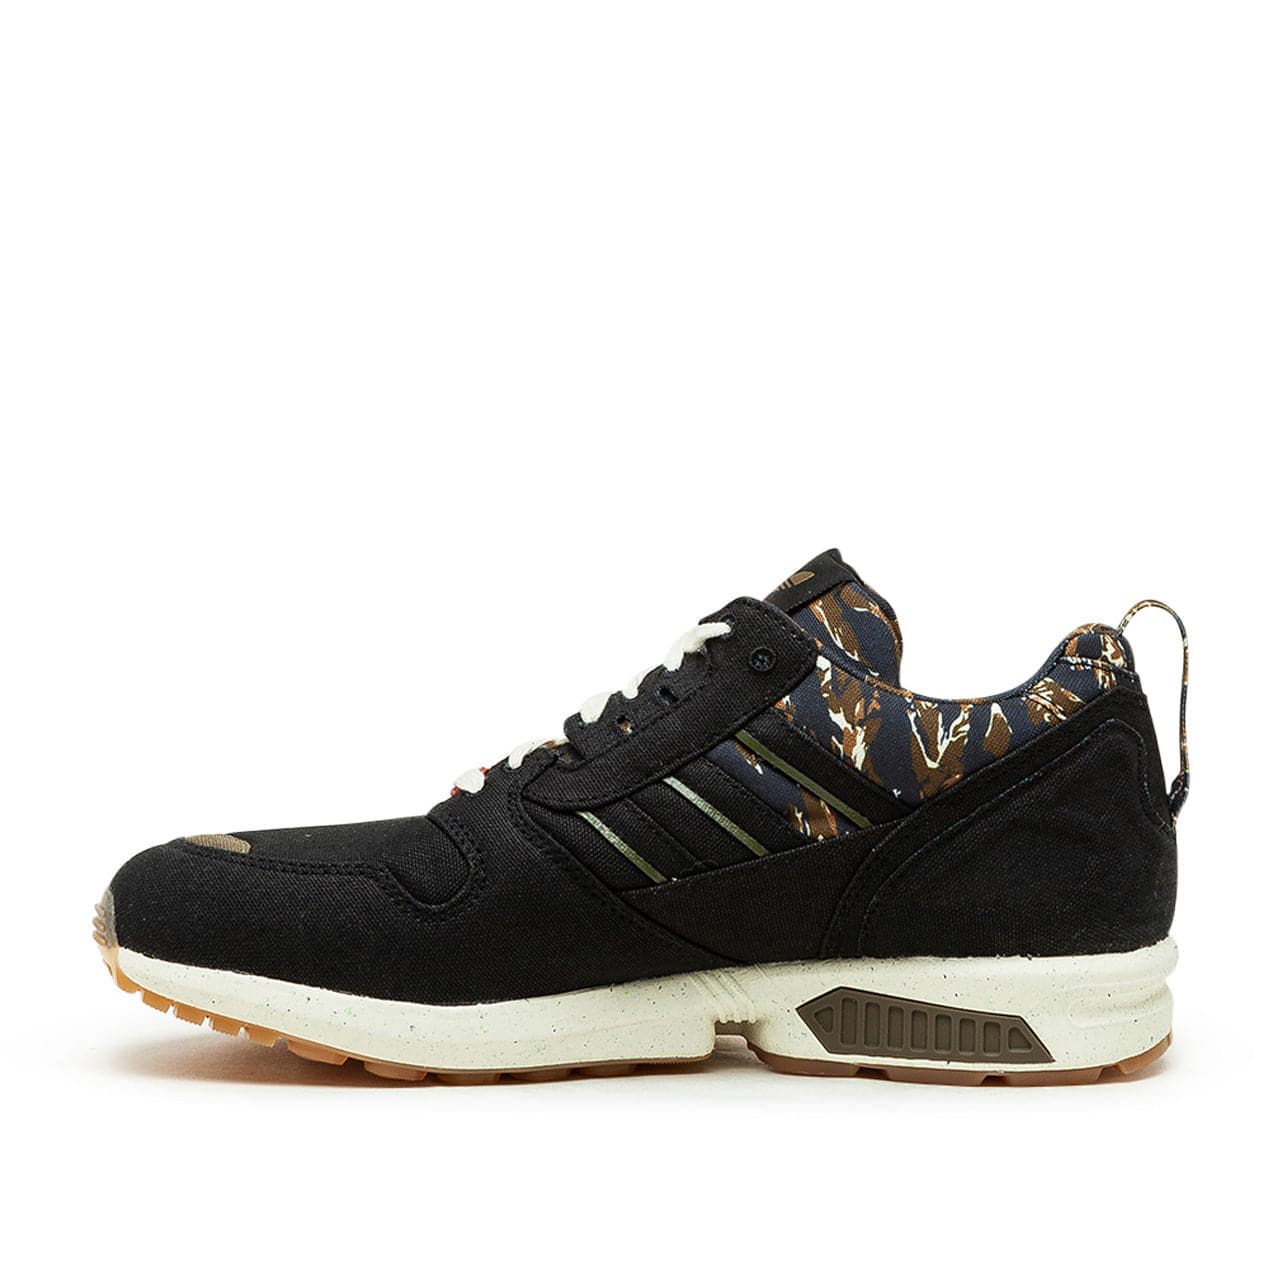 adidas ZX 8000 'Out There' (Schwarz / Weiß / Olive)  - Allike Store